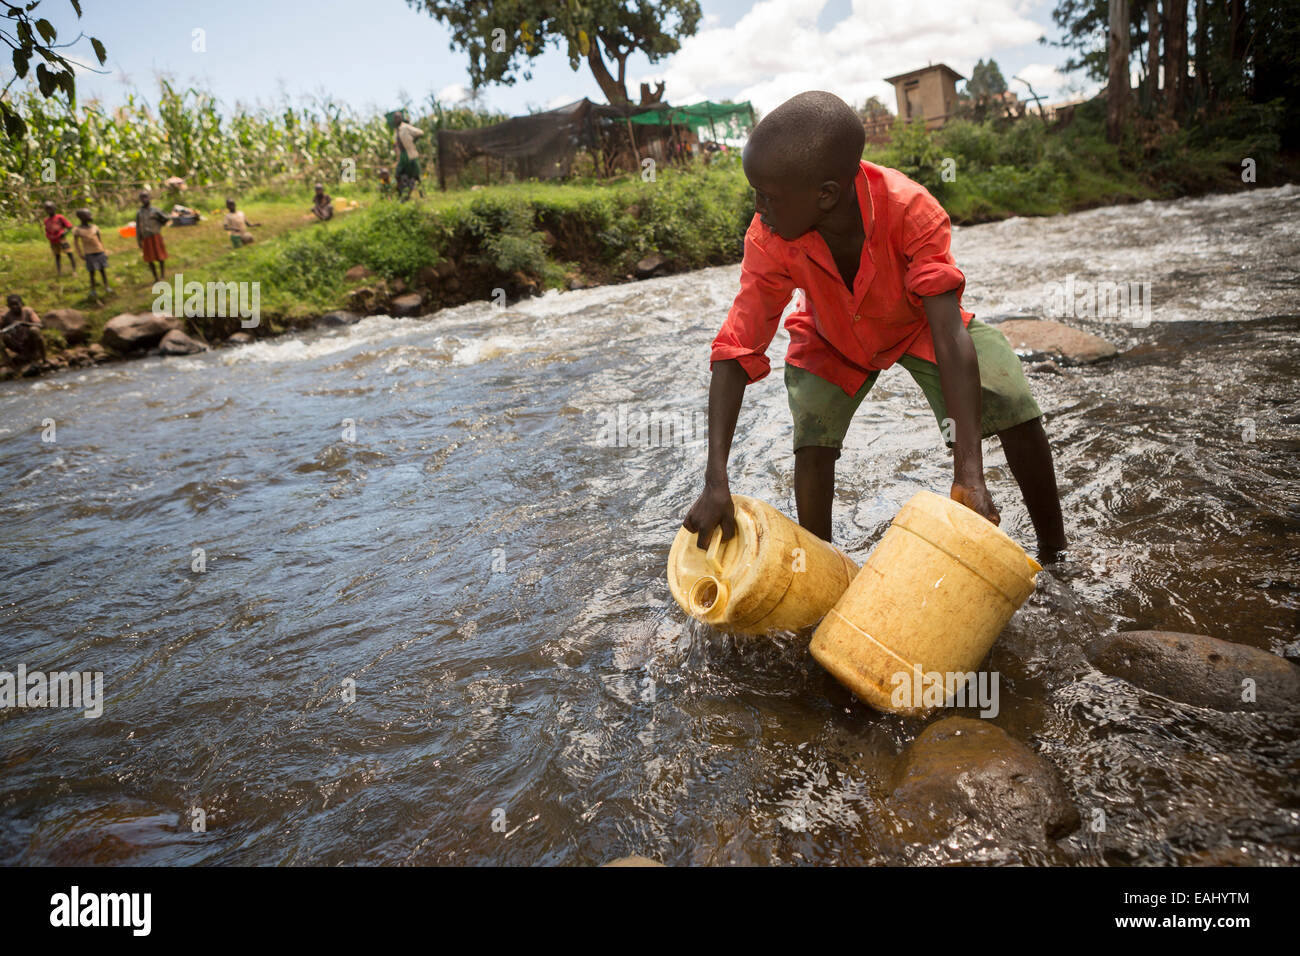 Many people in Bukwo, Uganda draw their drinking water from unprotected or contaminated sources, such as the River Bukwo. Stock Photo